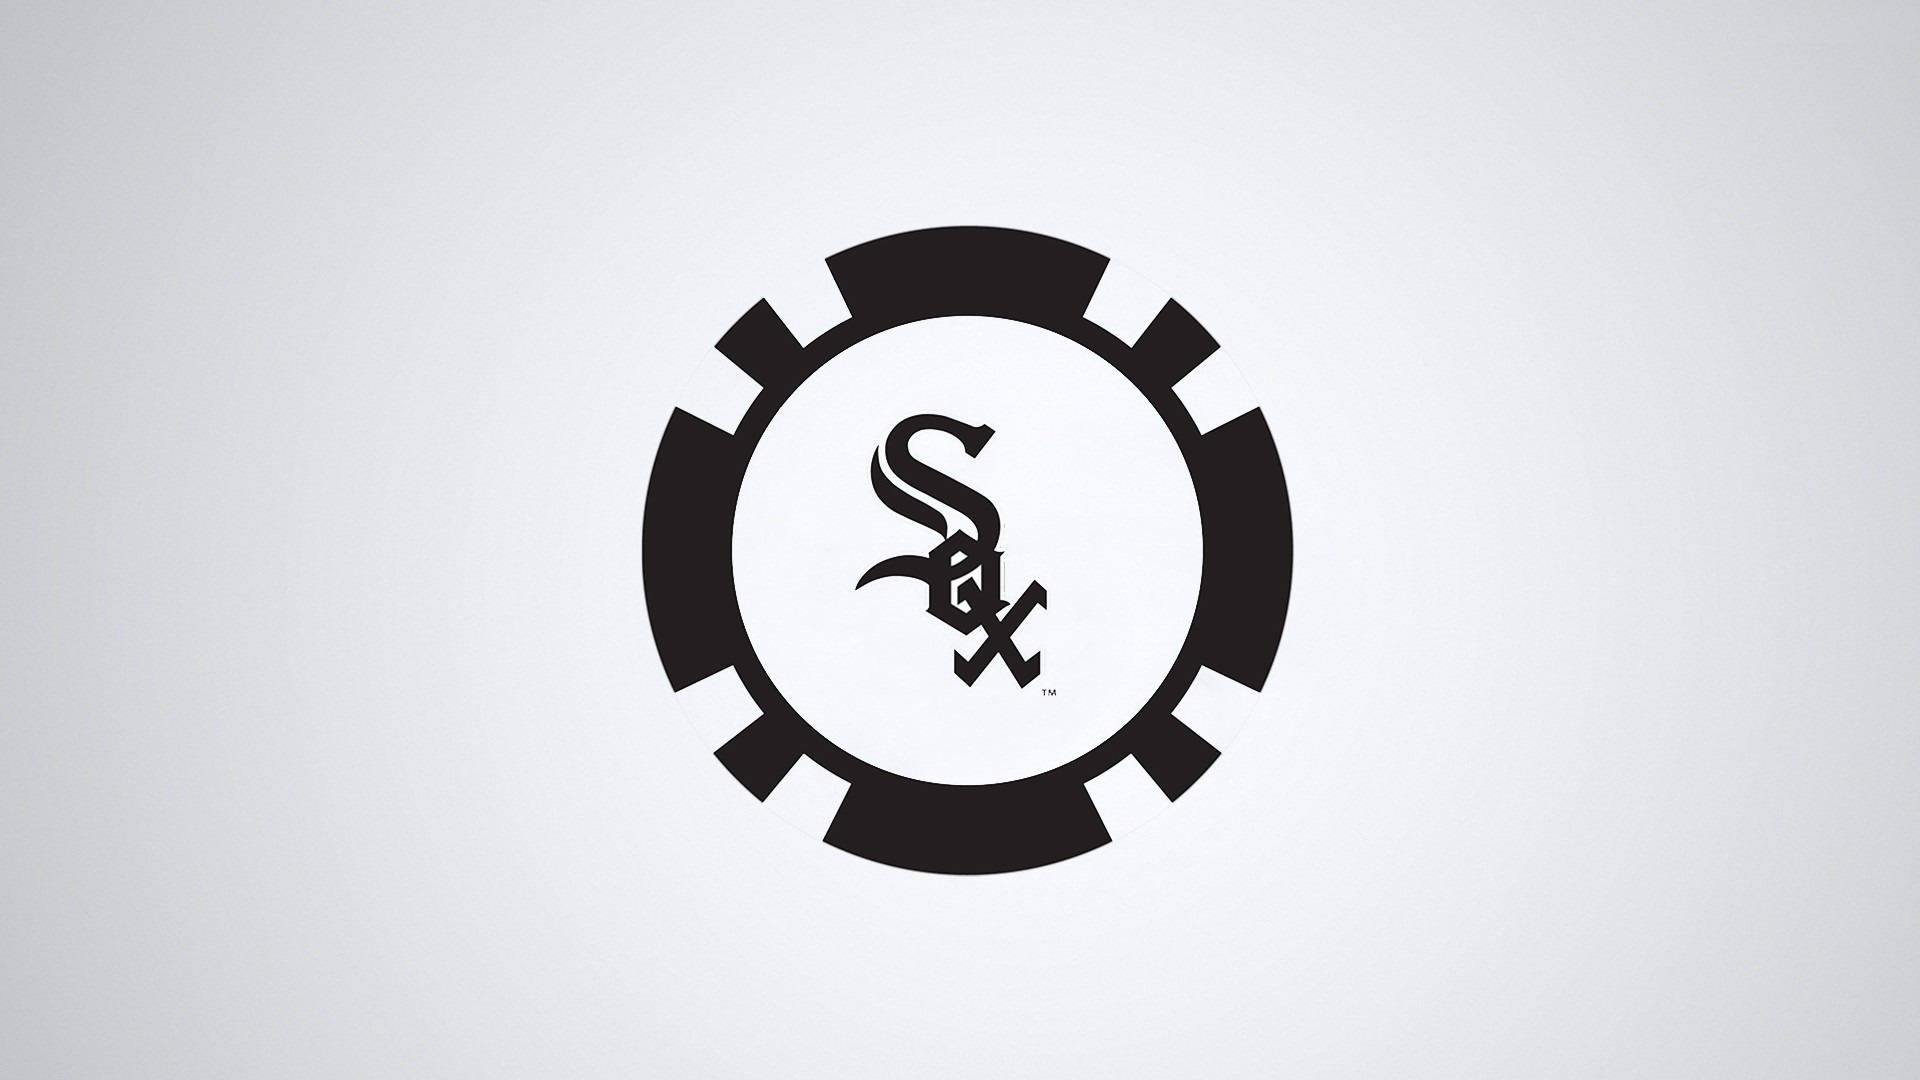 1920X1080 Chicago White Sox Wallpaper and Background